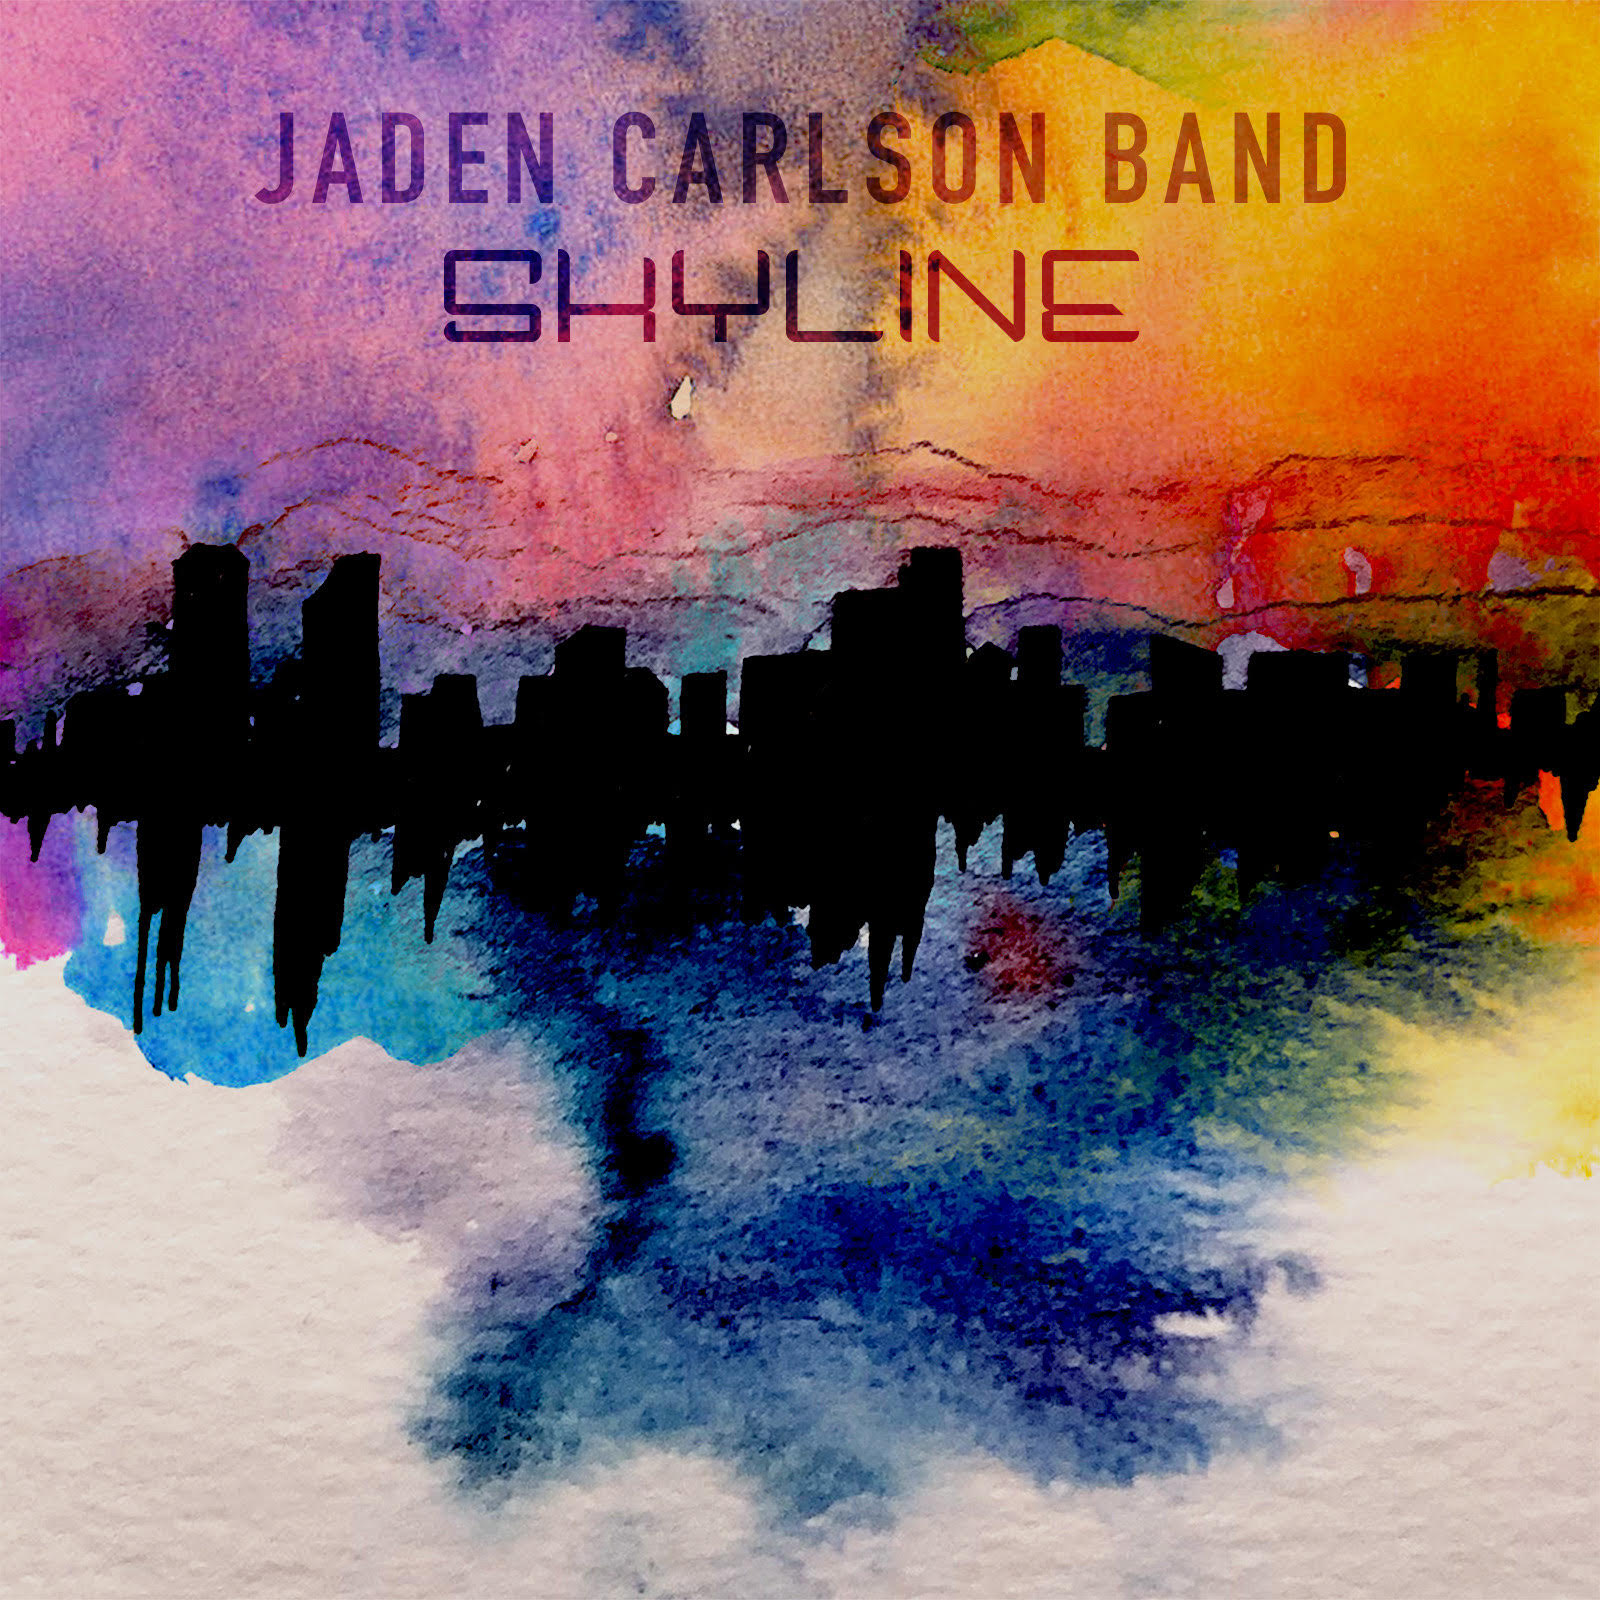 New Single “Skyline” From The Jaden Carlson Band to be Released December 17, 2019